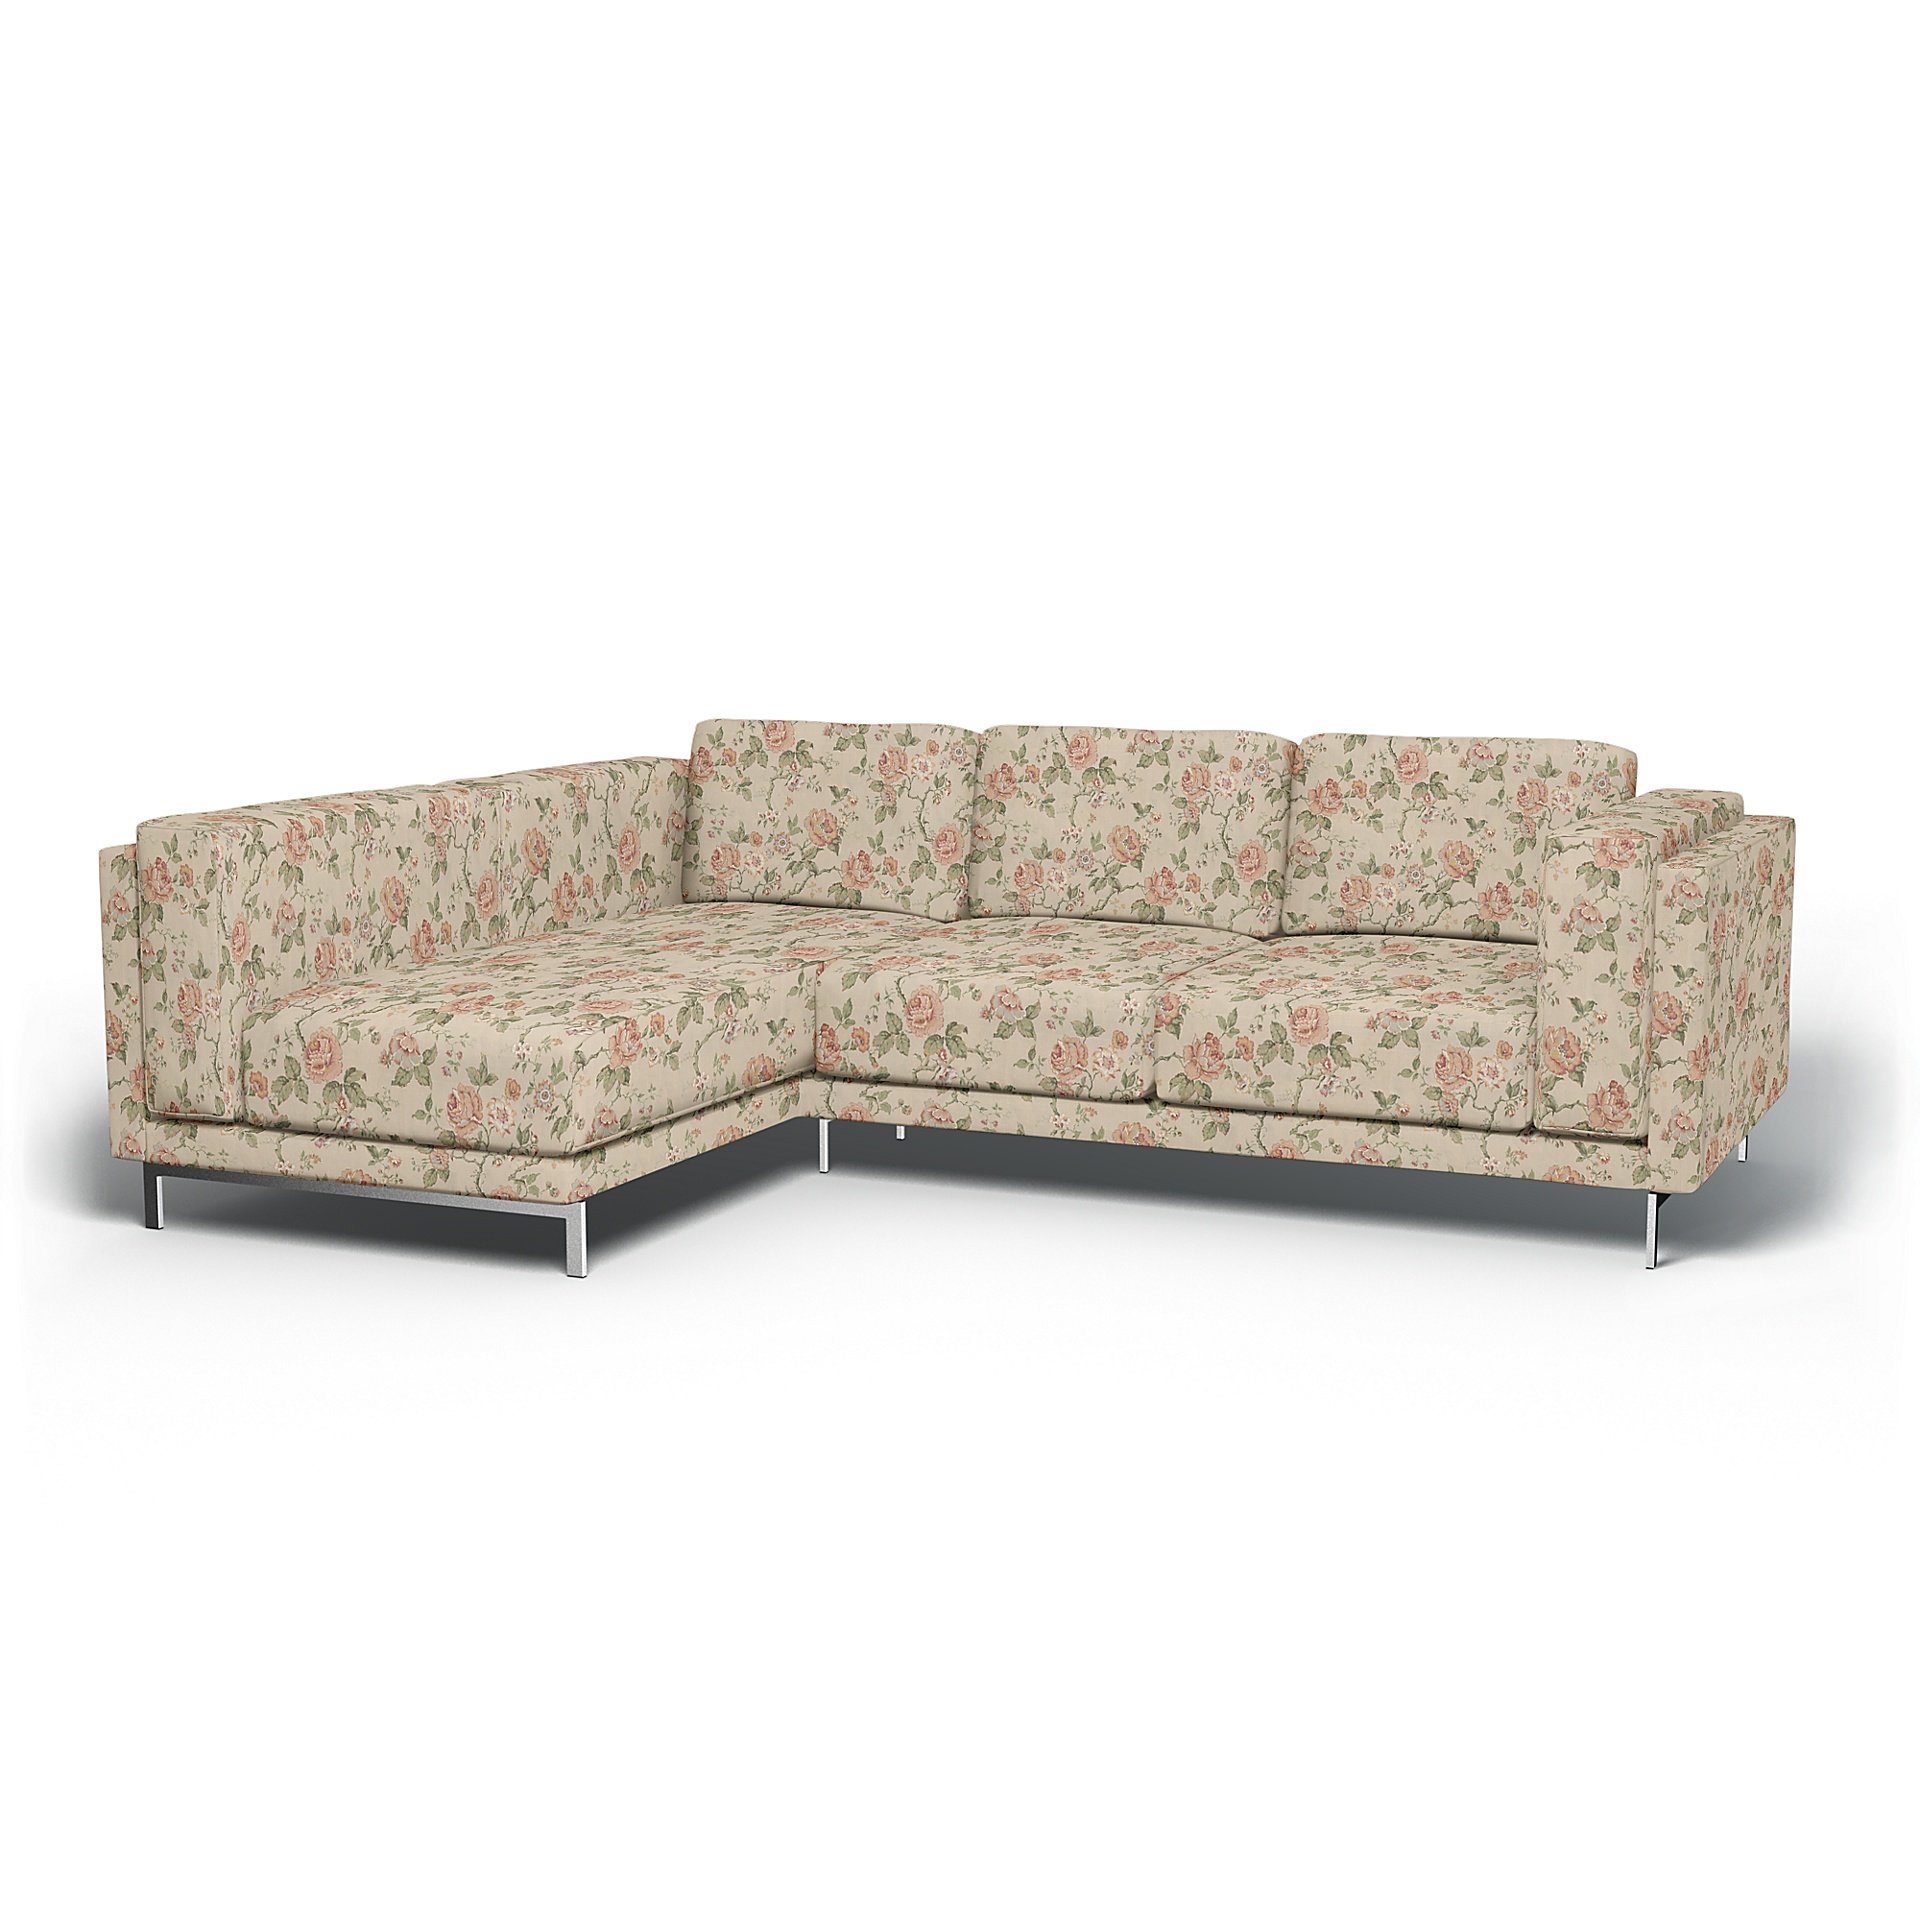 IKEA - Nockeby 3 Seater Sofa with Left Chaise Cover, Rosentrad Light, BEMZ x BORASTAPETER COLLECTION